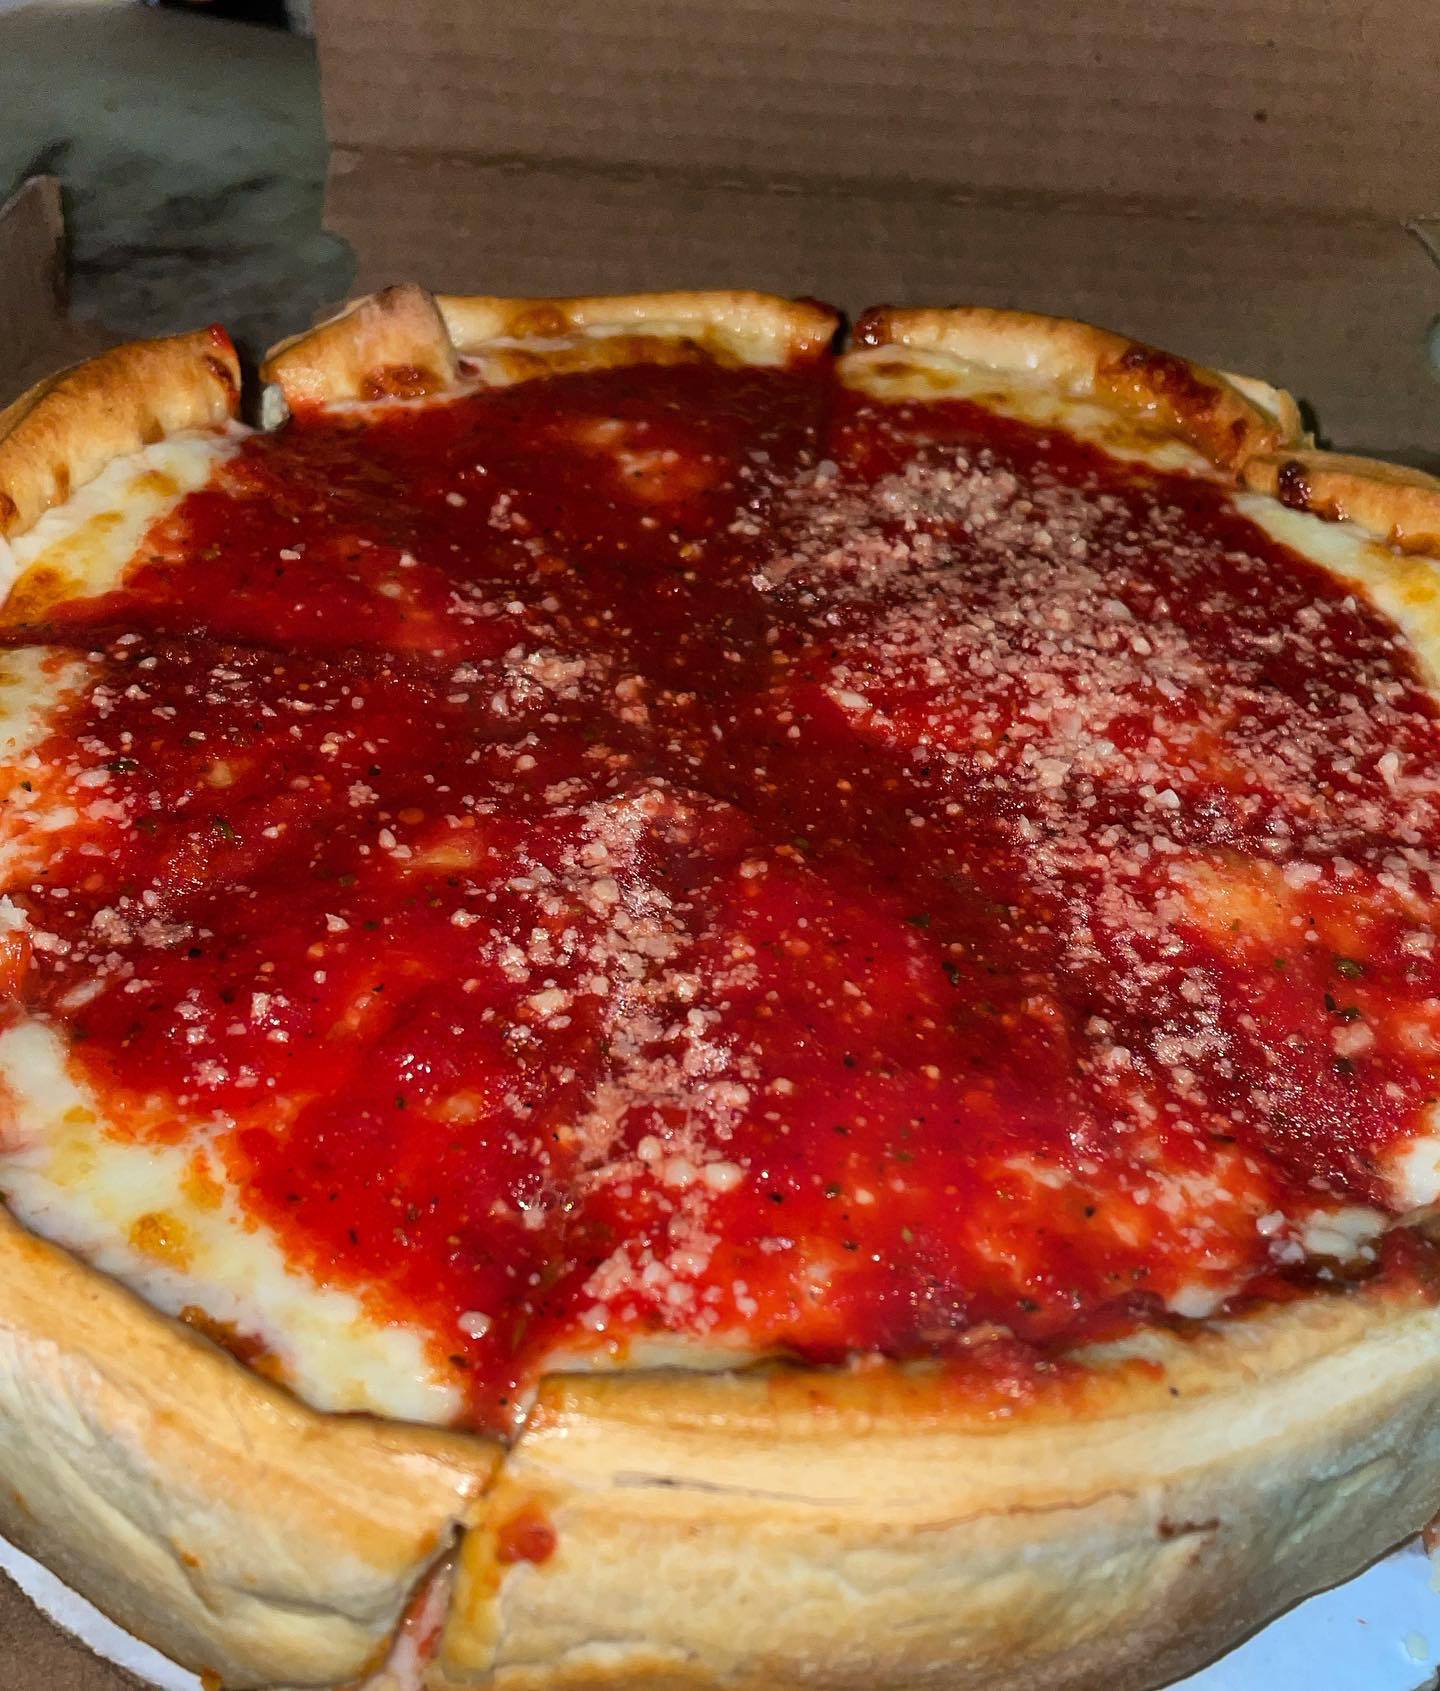 Antonino's Ristorante in La Grange was voted in the top nine pizza places in the Cook County area by readers in 2021. (Photo from Antonino's Ristorante Facebook page)